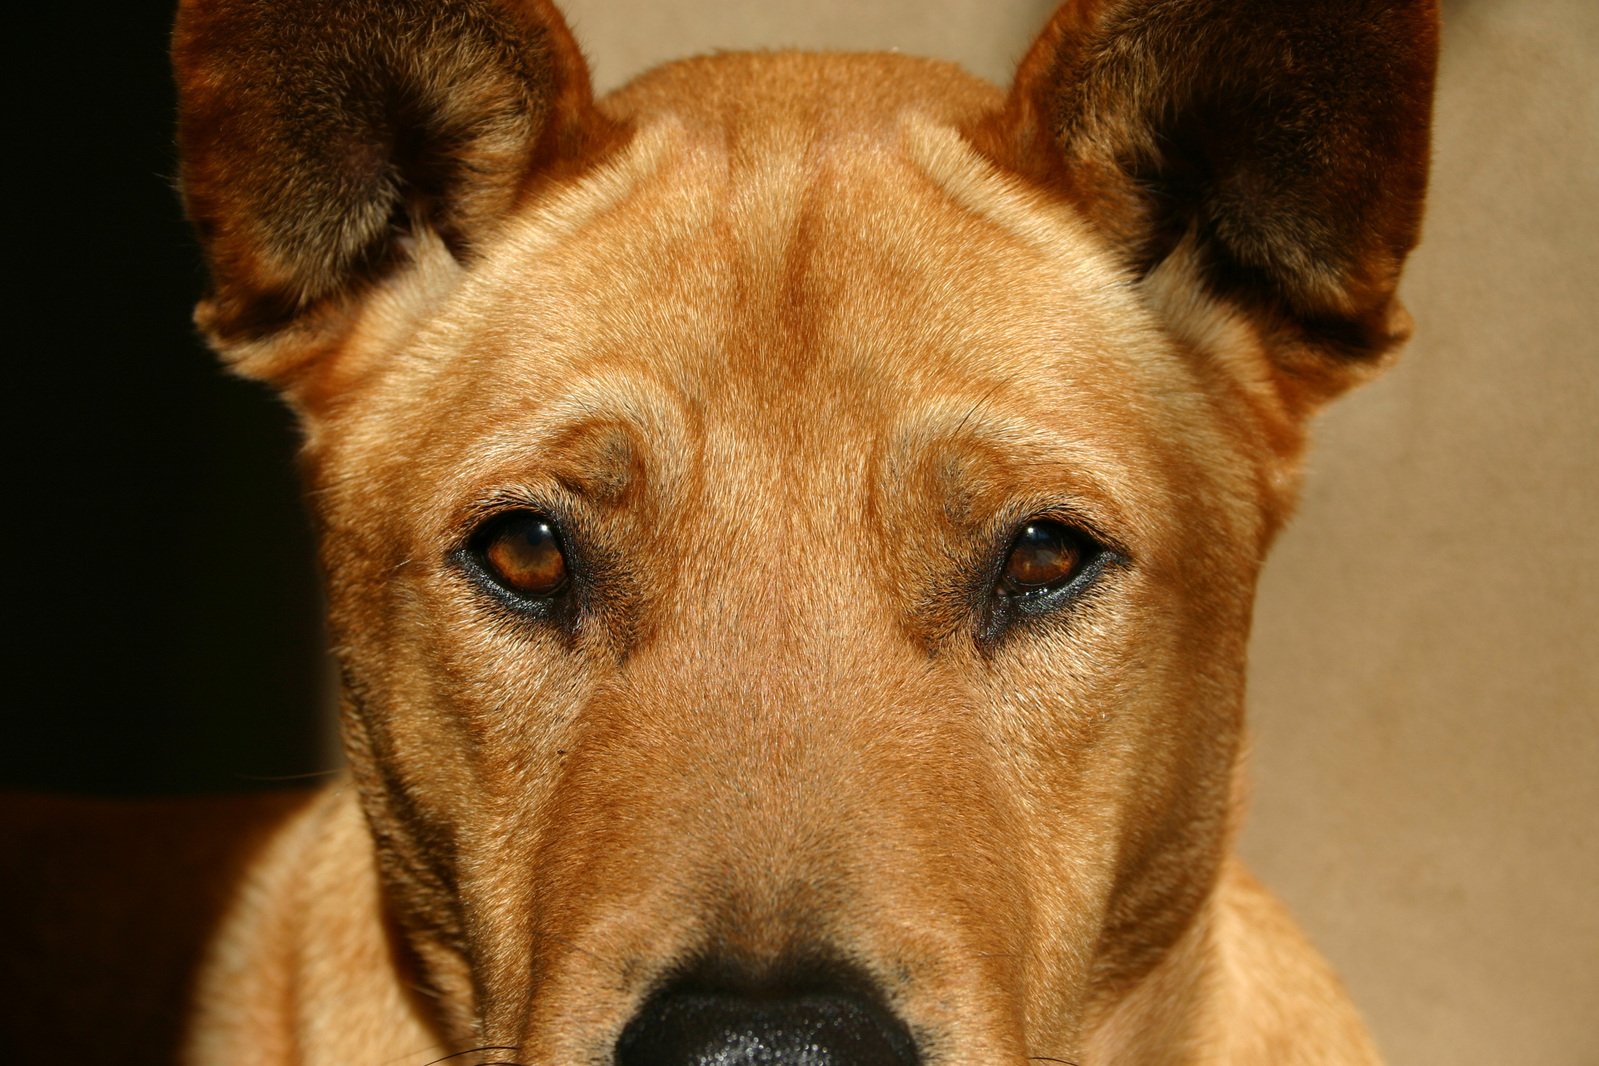 a brown dog has eyes wide open looking at the camera